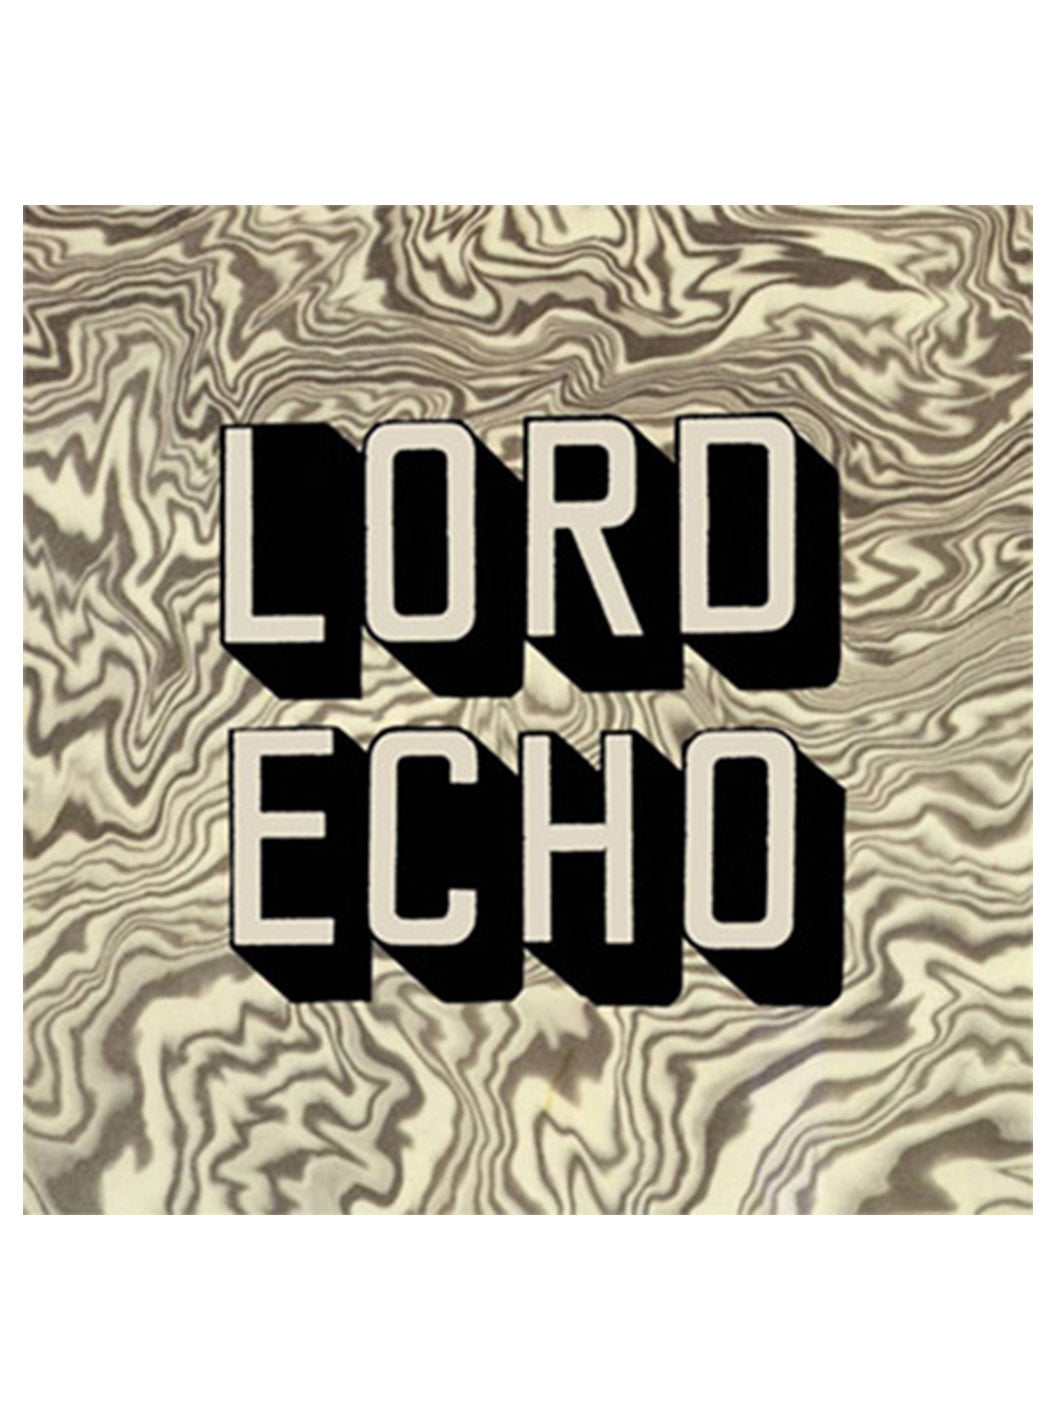 Lord Echo - Melodies (2LP)